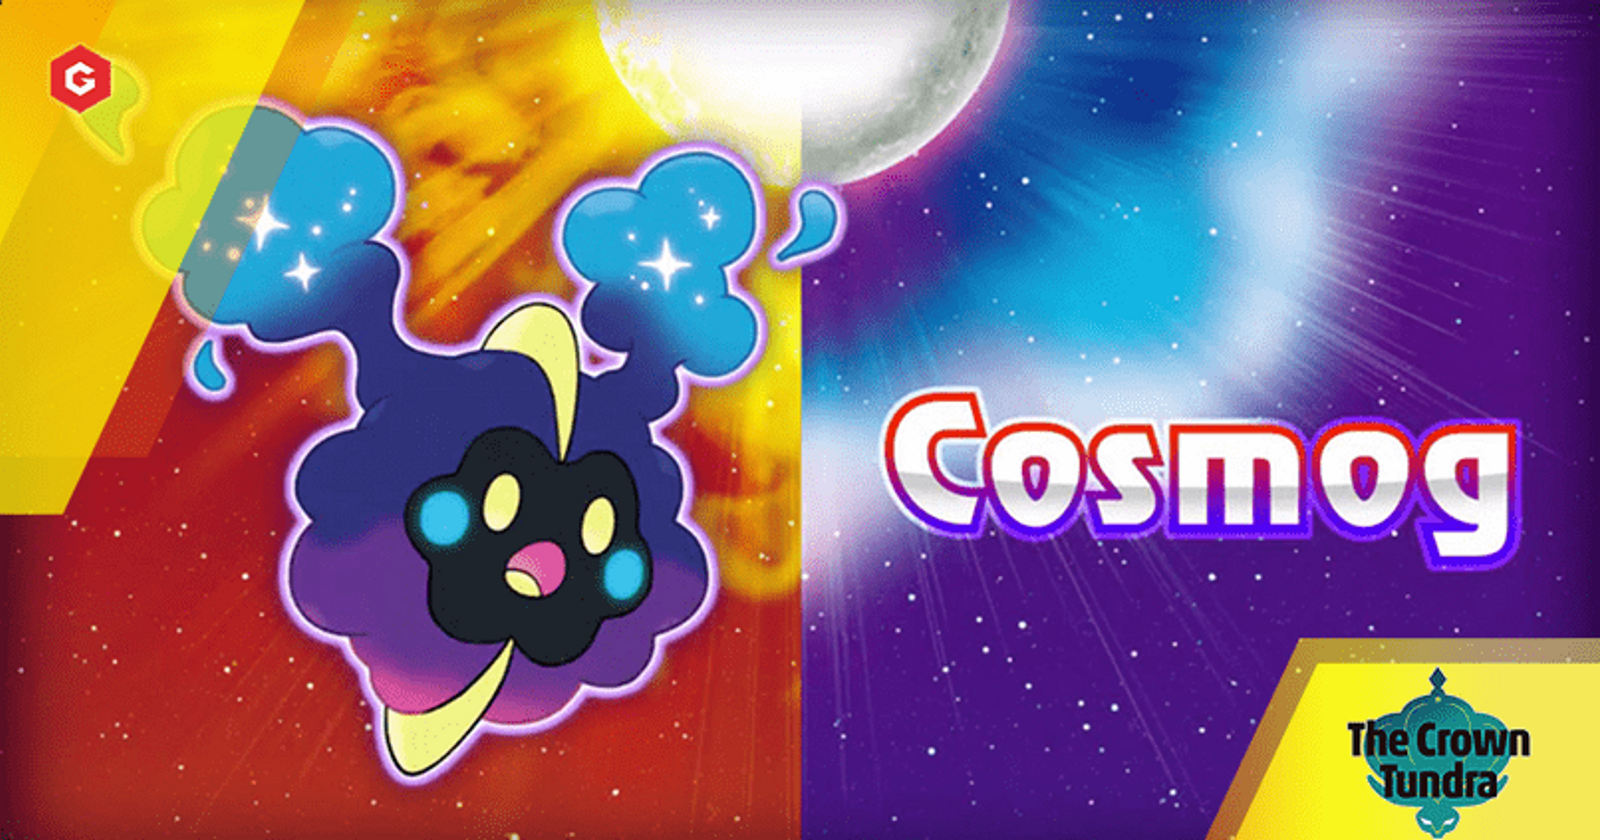 Pokemon Sword and Shield The Crown Tundra: How to Get Cosmog